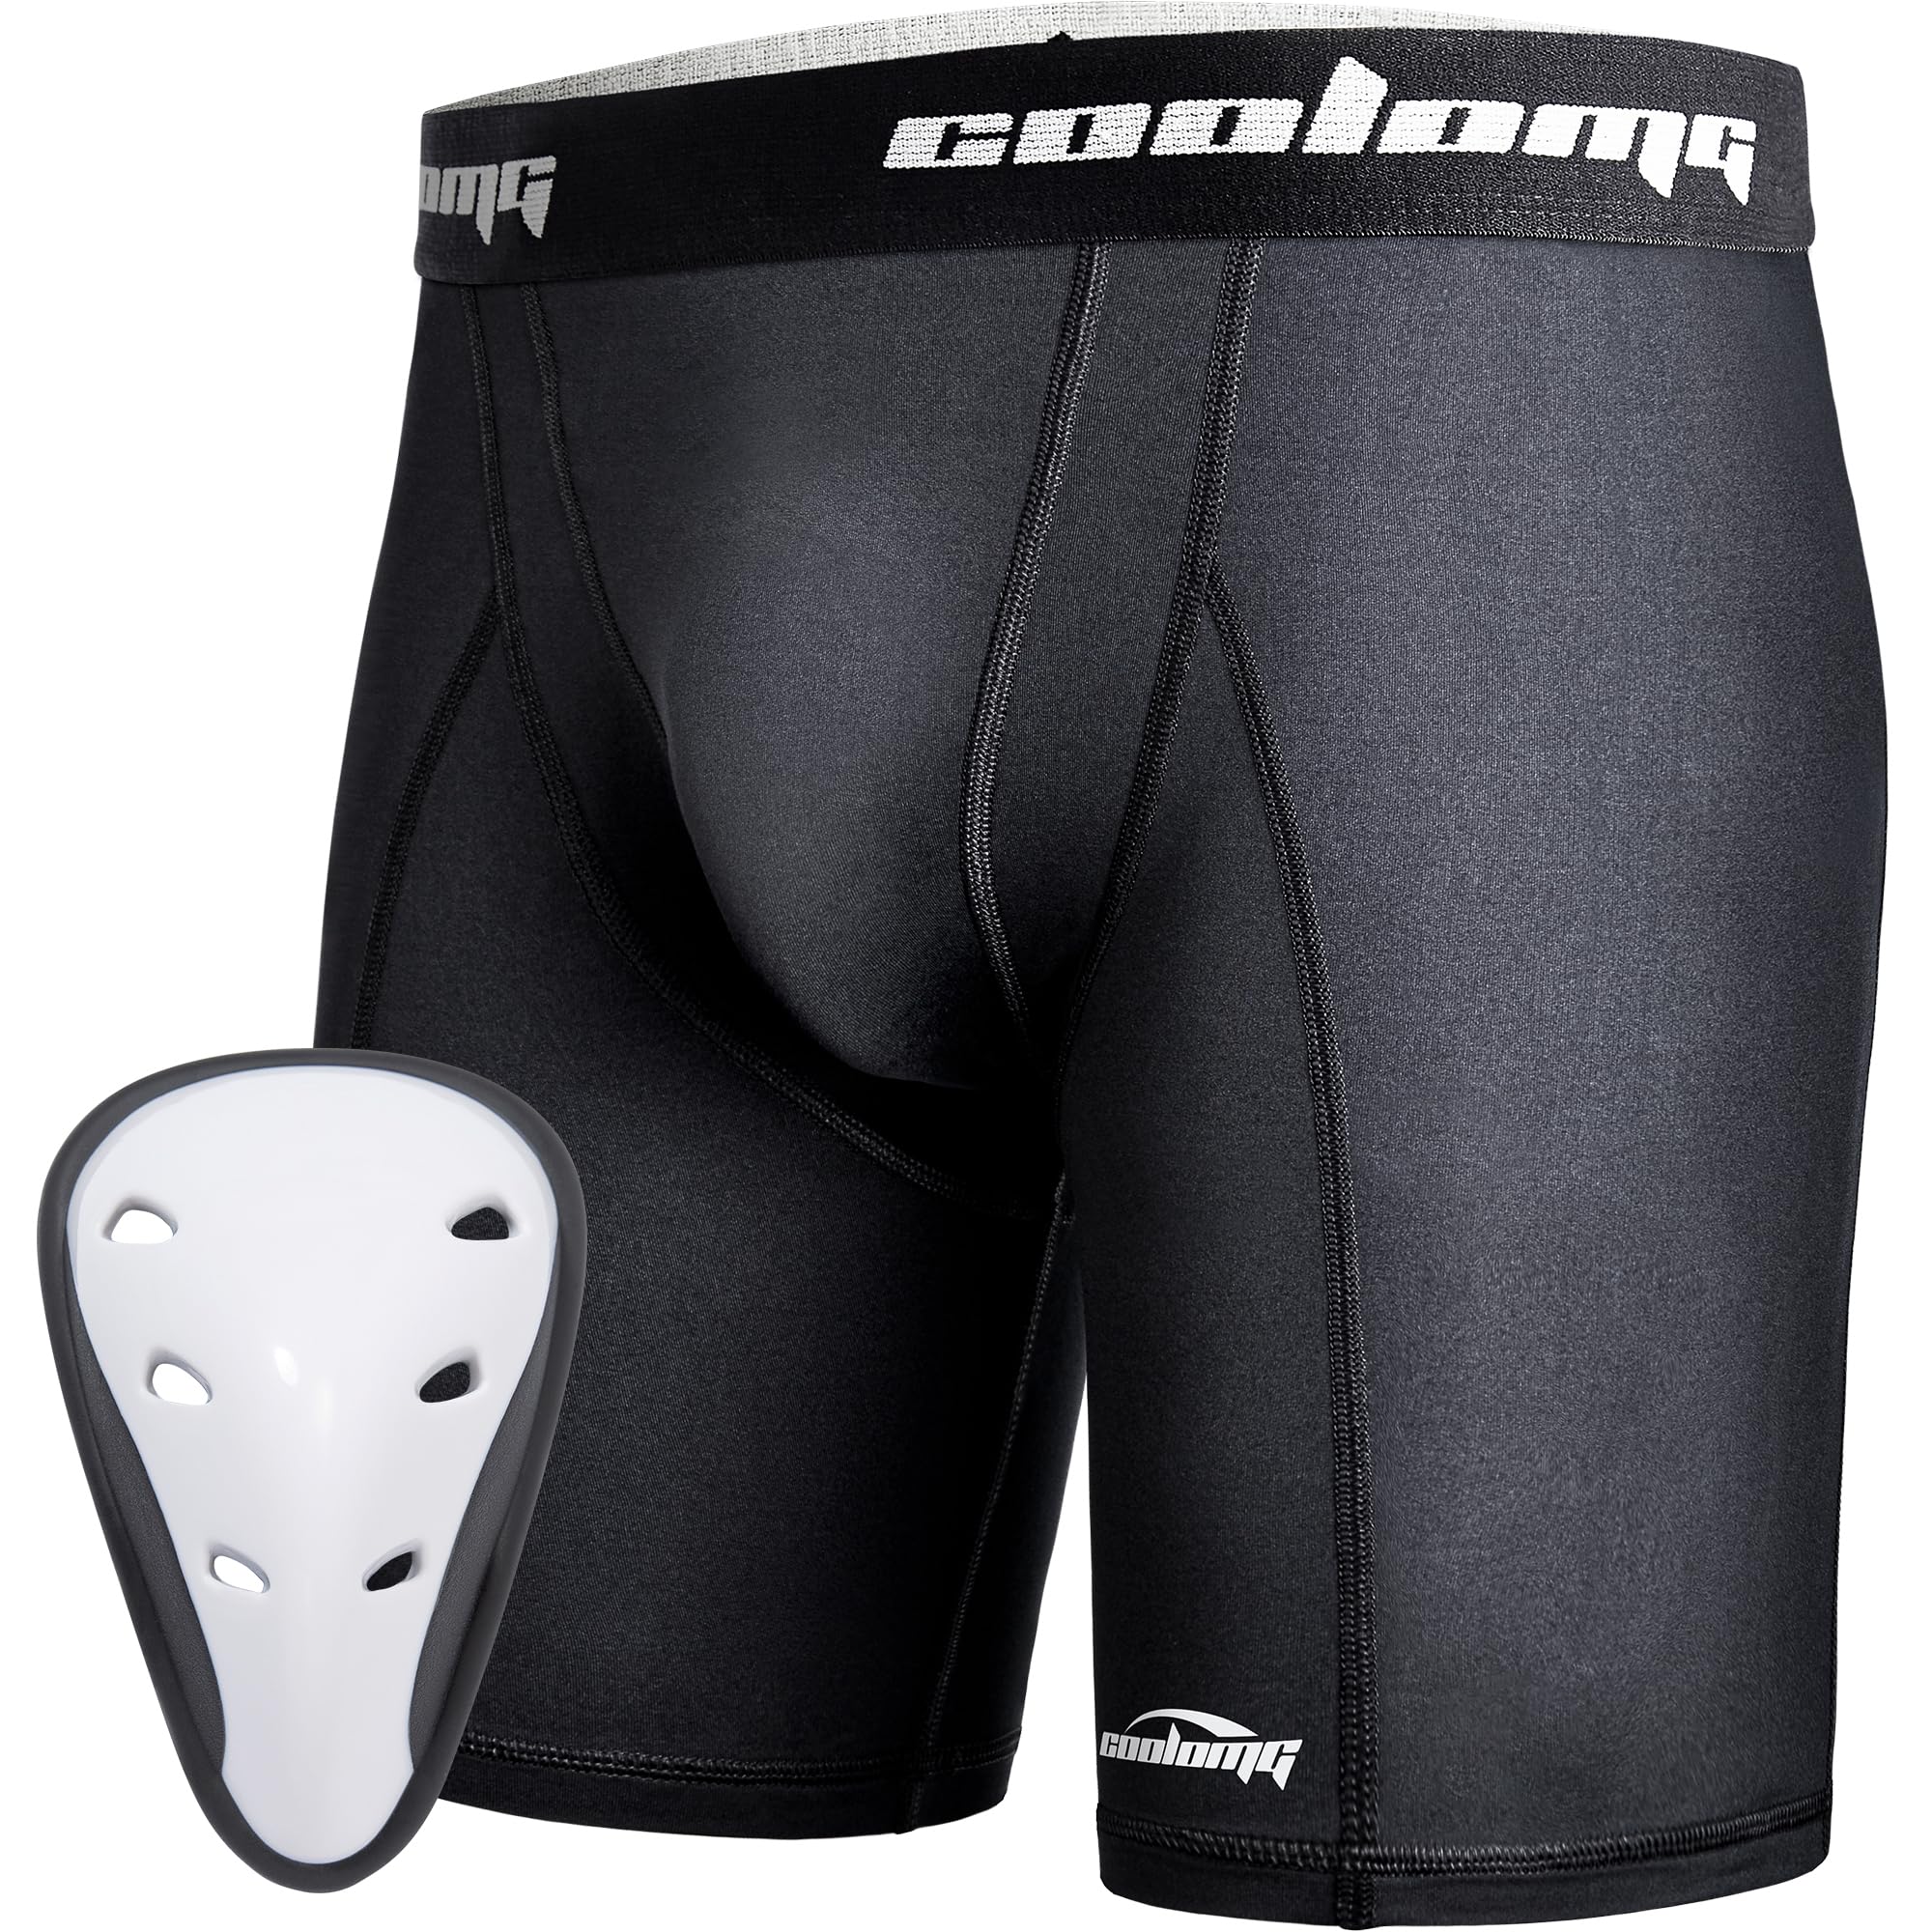 COOLOMG Men Compression Shorts with Protective Cup Sliding Underwear for Baseball Football MMA Lacrosse Hockey